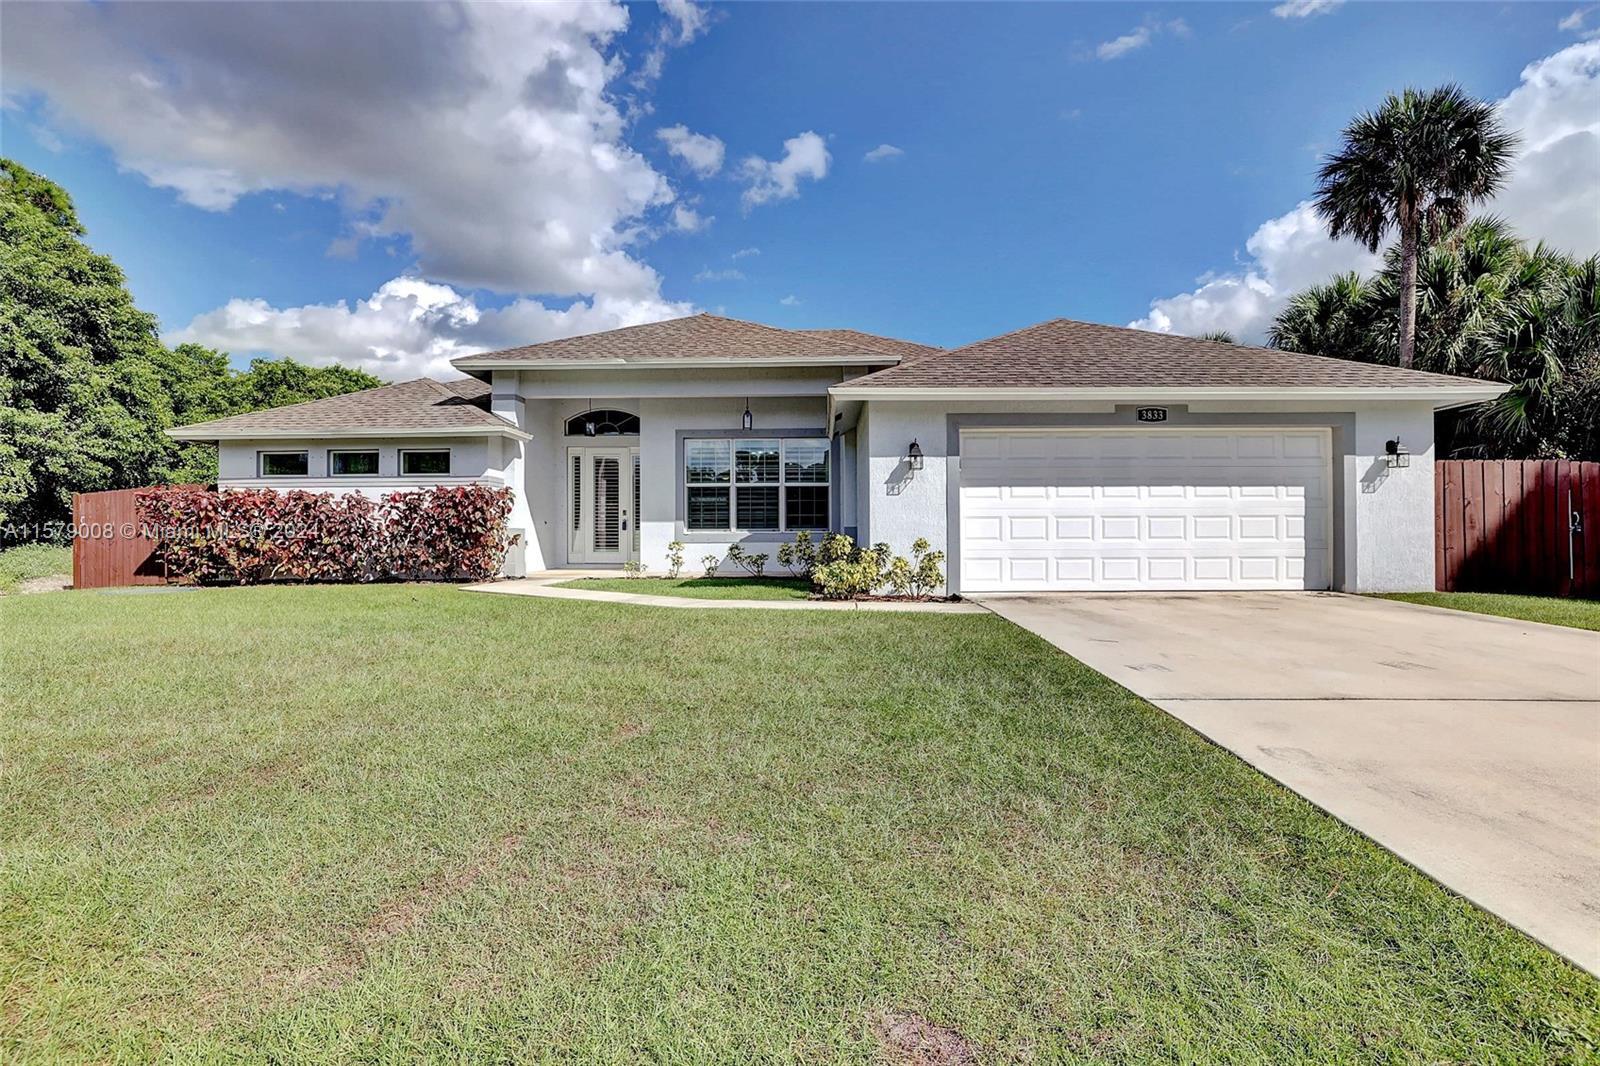 Photo of 3833 SW Alice St in Port St Lucie, FL